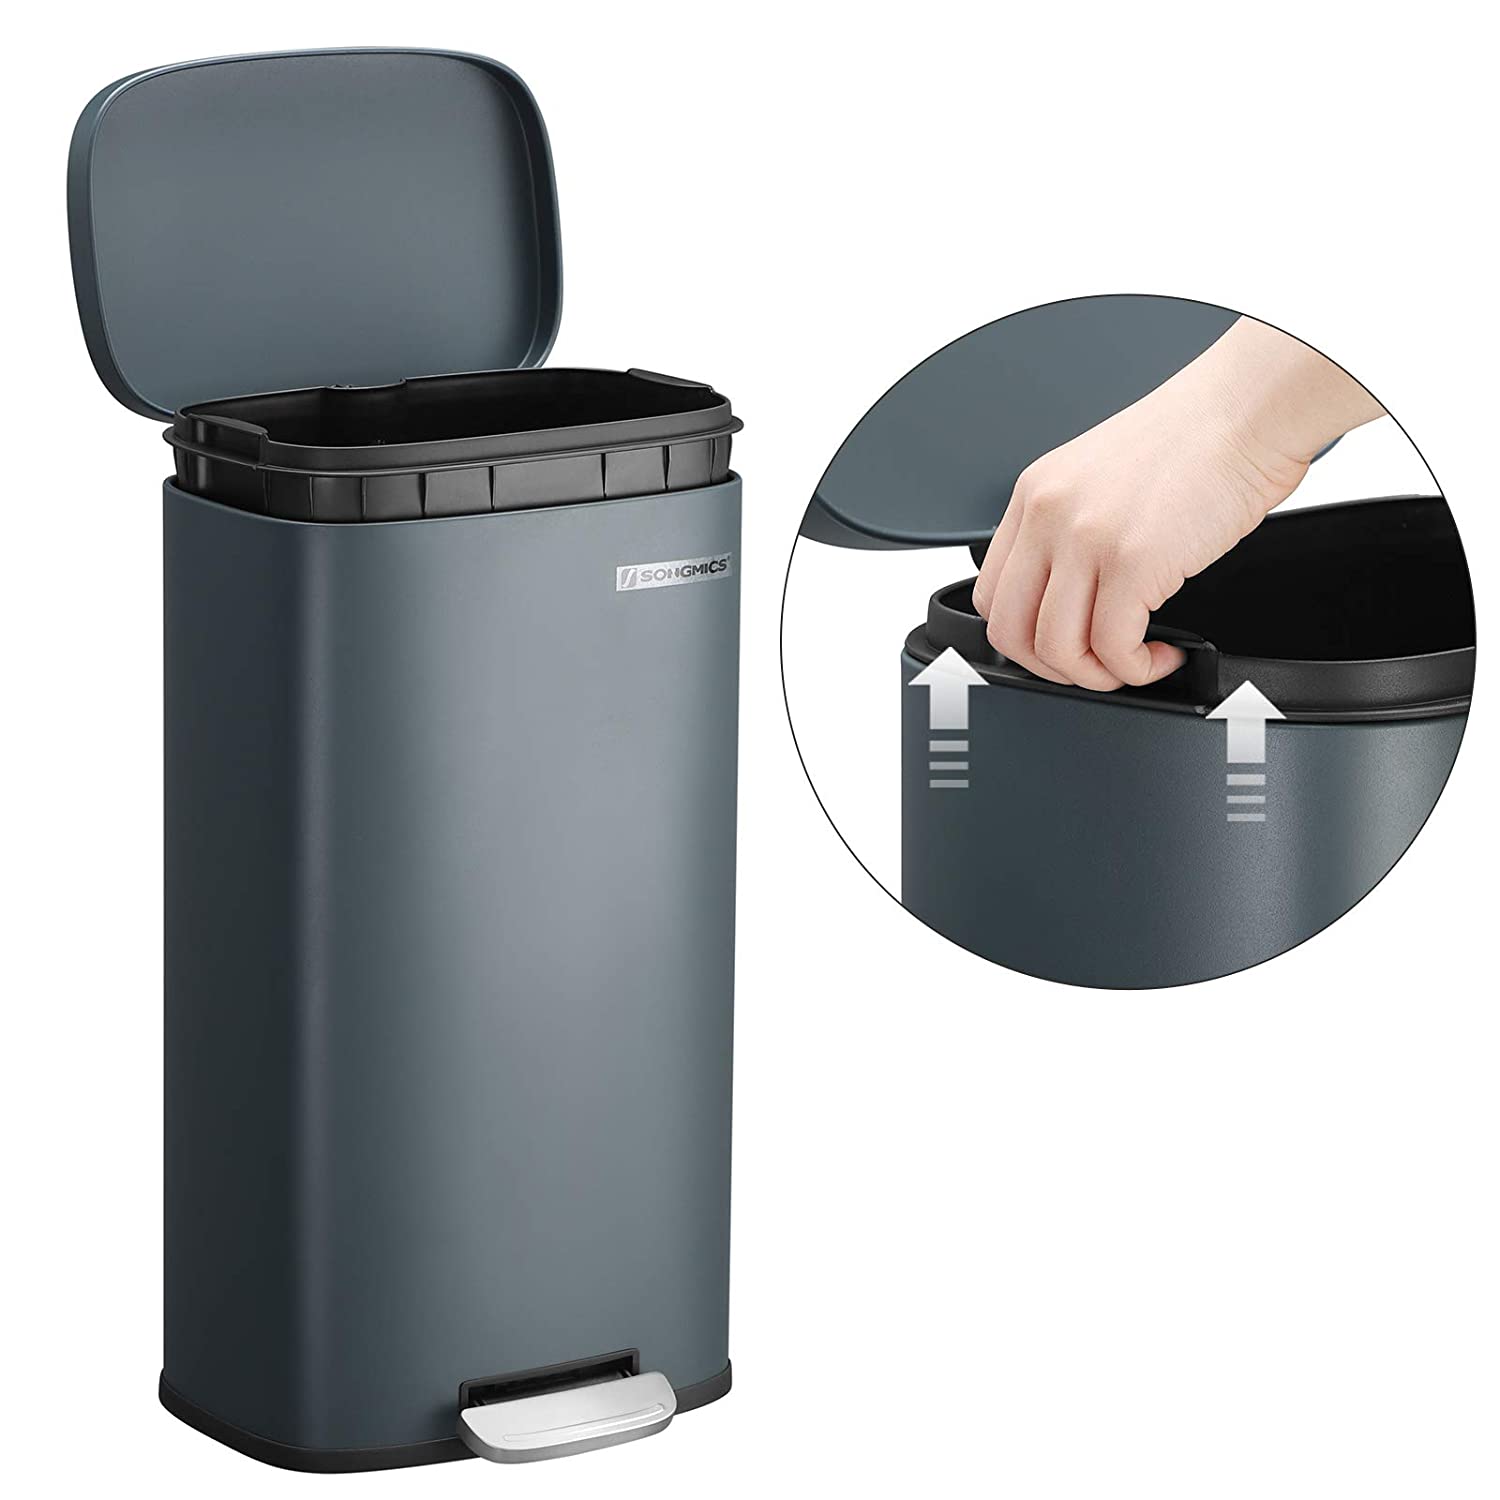 Kitchen Rubbish Bin, Pedal Trash Can 30L, with Plastic Inner Bucket, Hinged Lid, Soft Closure, Odour Proof and Hygienic, Smoky Grey LTB03GS RAW58.dk 